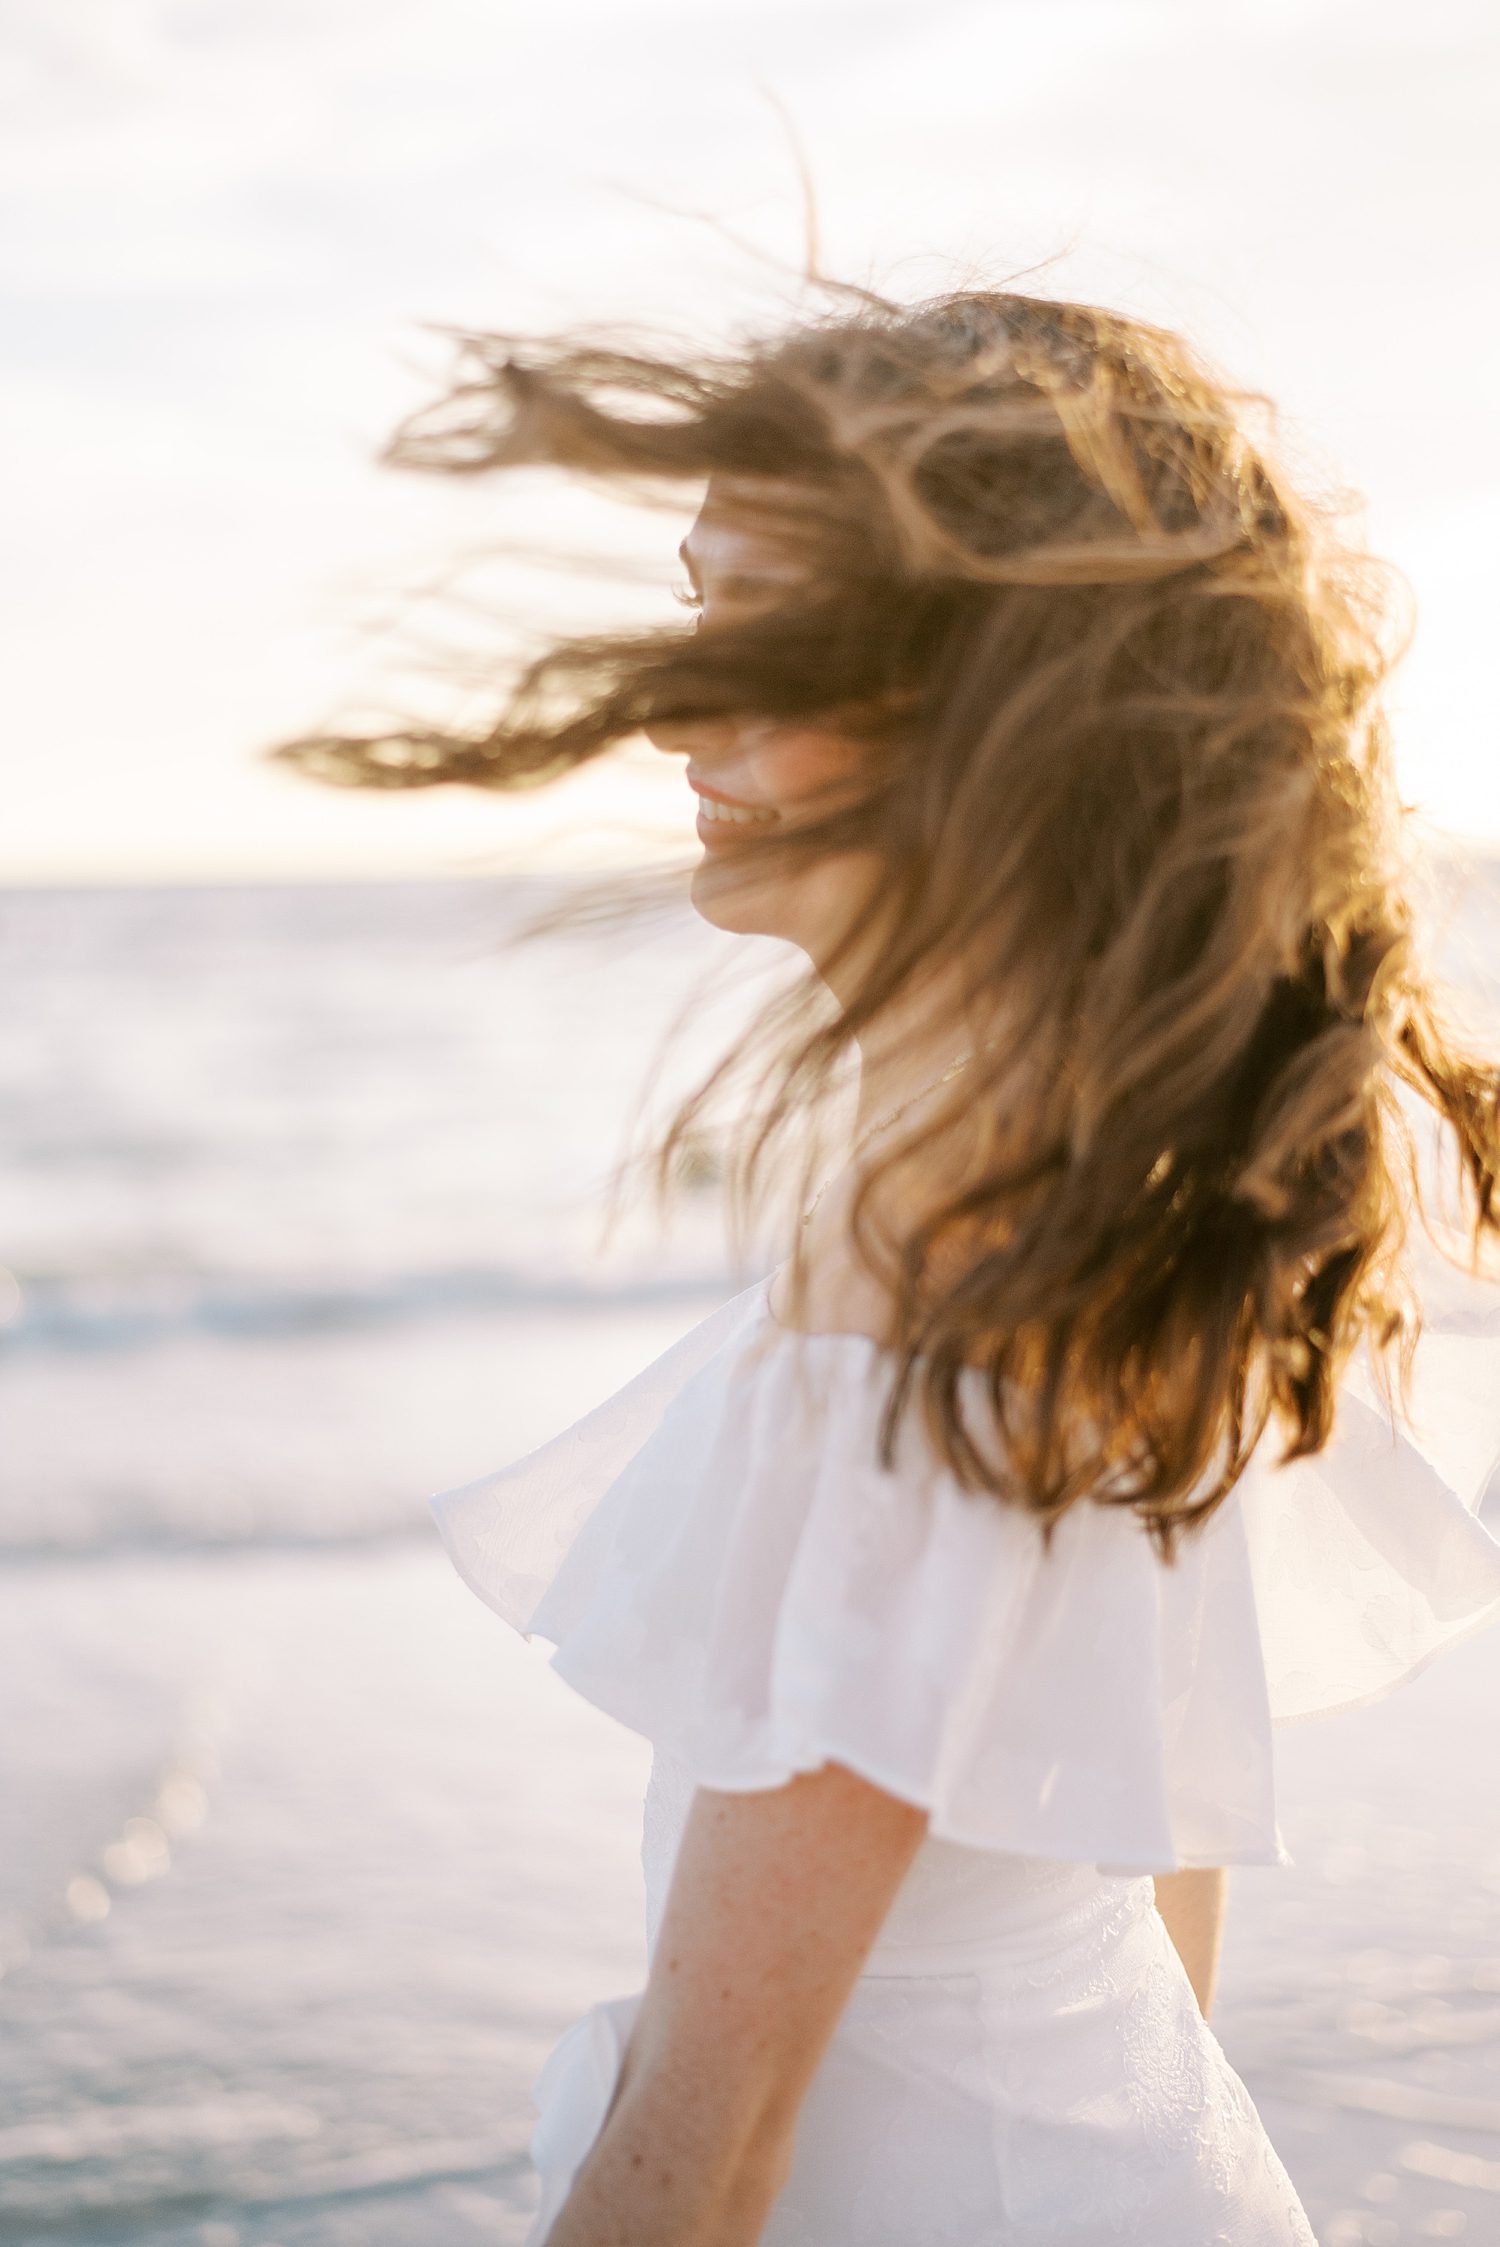 woman stands on beach with hair blowing in the wind